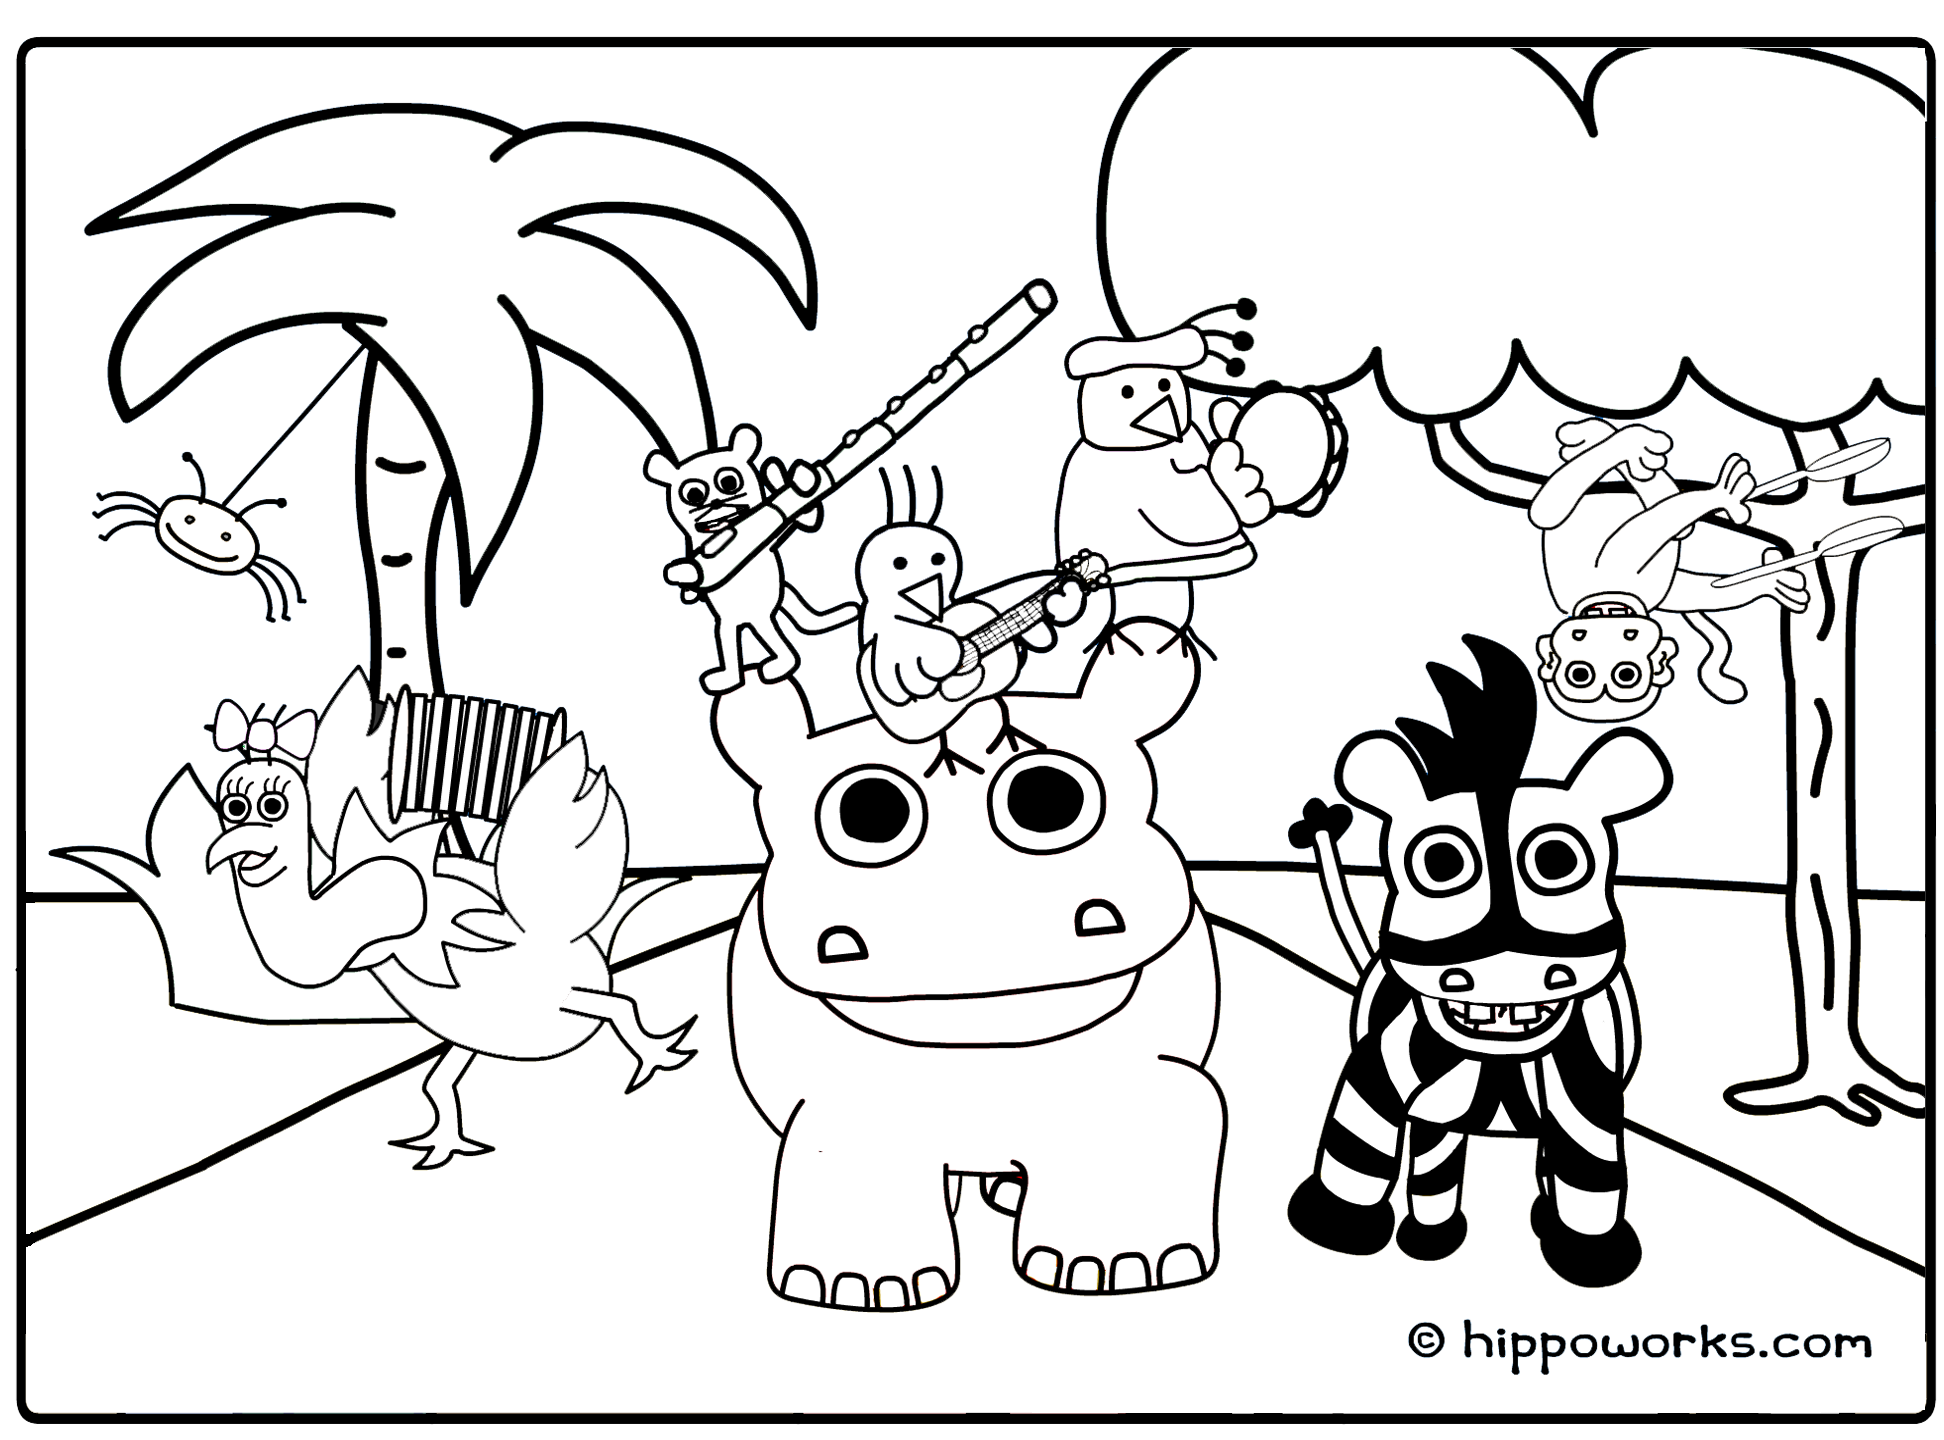 Jungle Animals Coloring Pages Free - Coloring Home